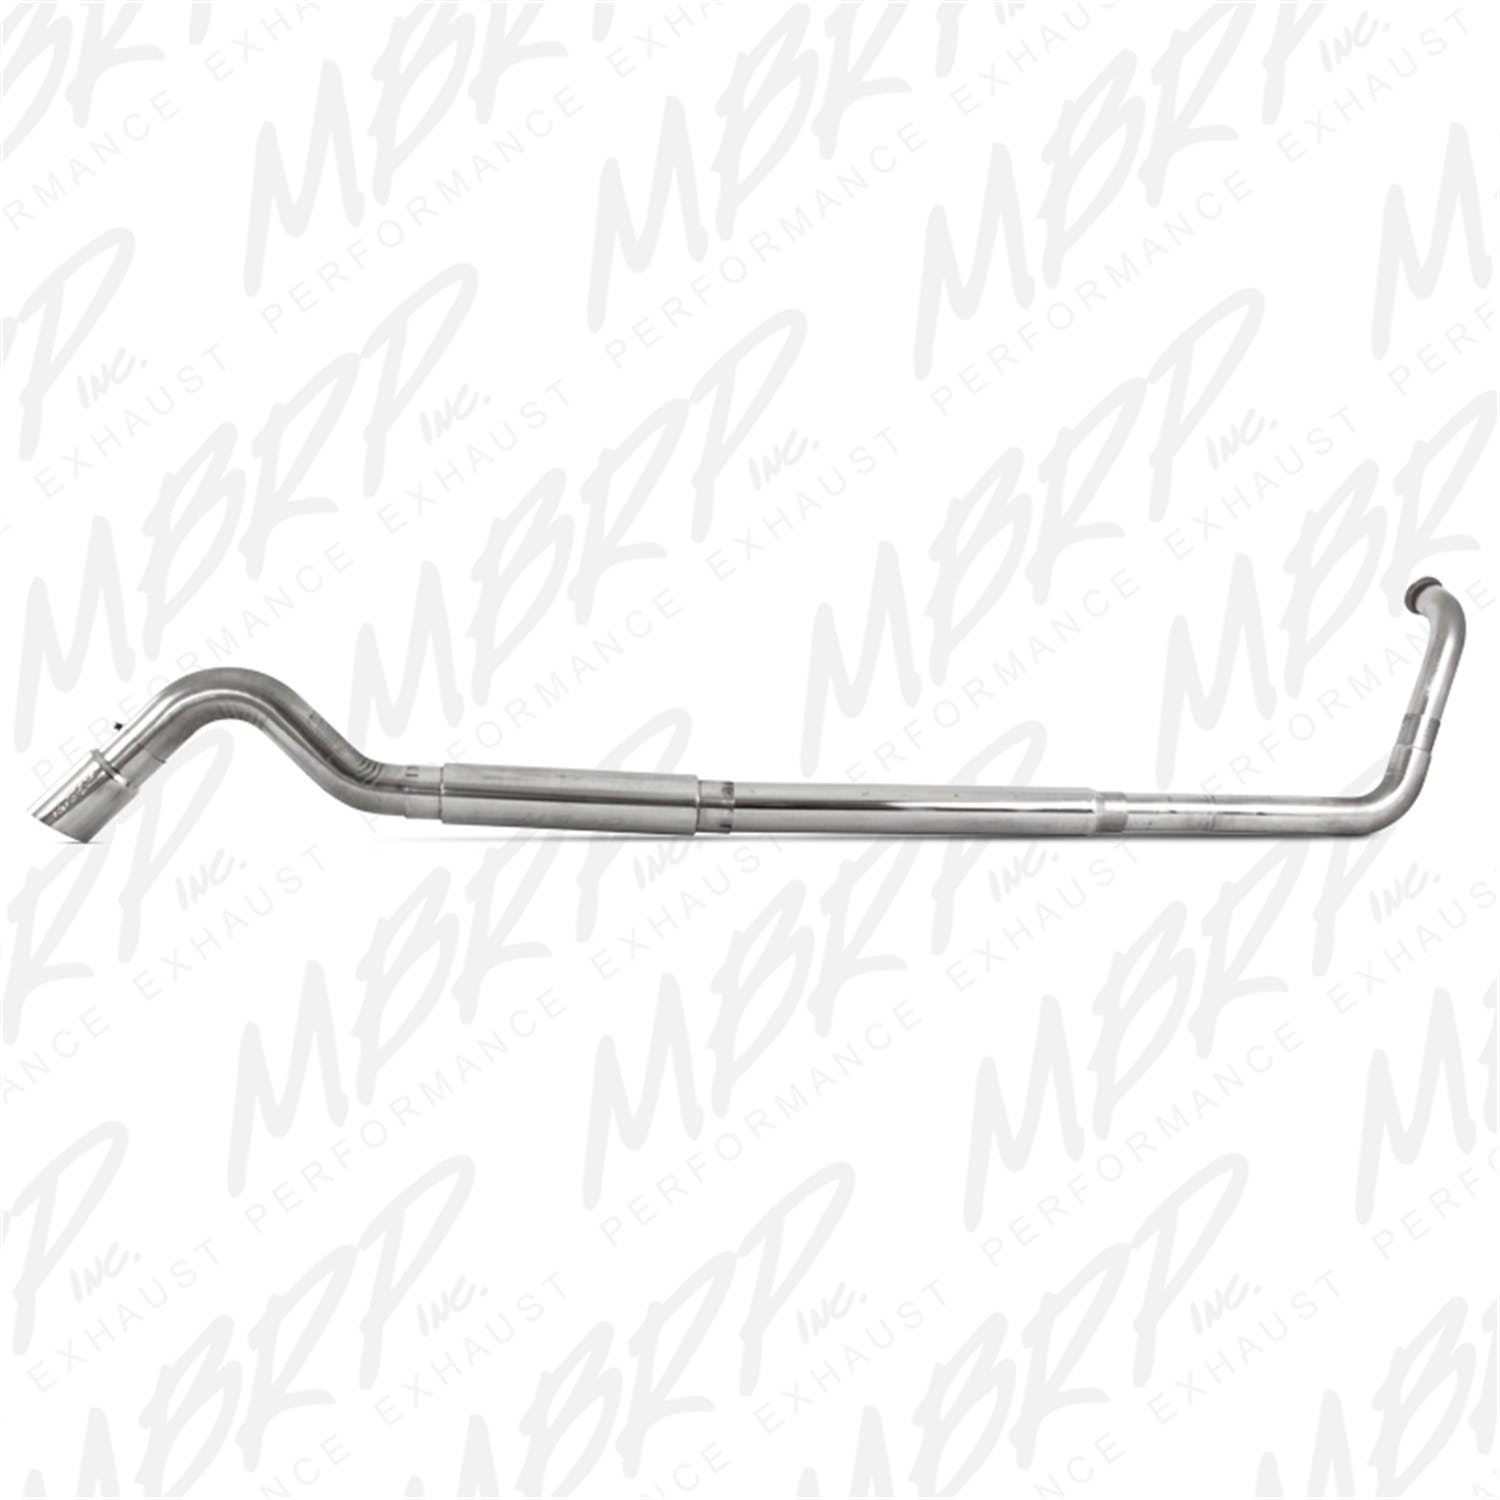 MBRP Exhaust S6224TD TD Series Turbo Back Exhaust System